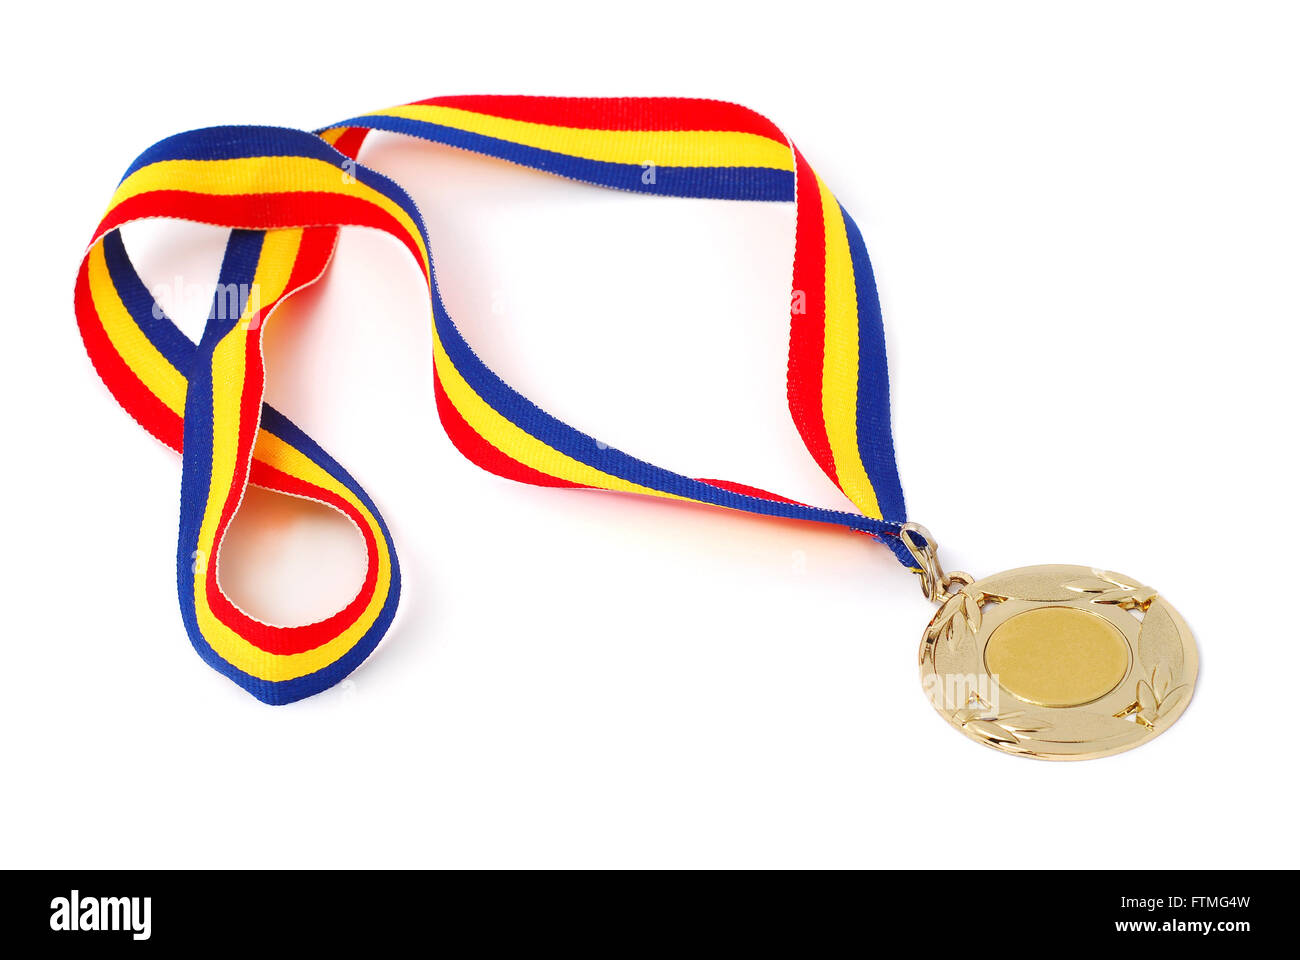 gold medal Stock Photo